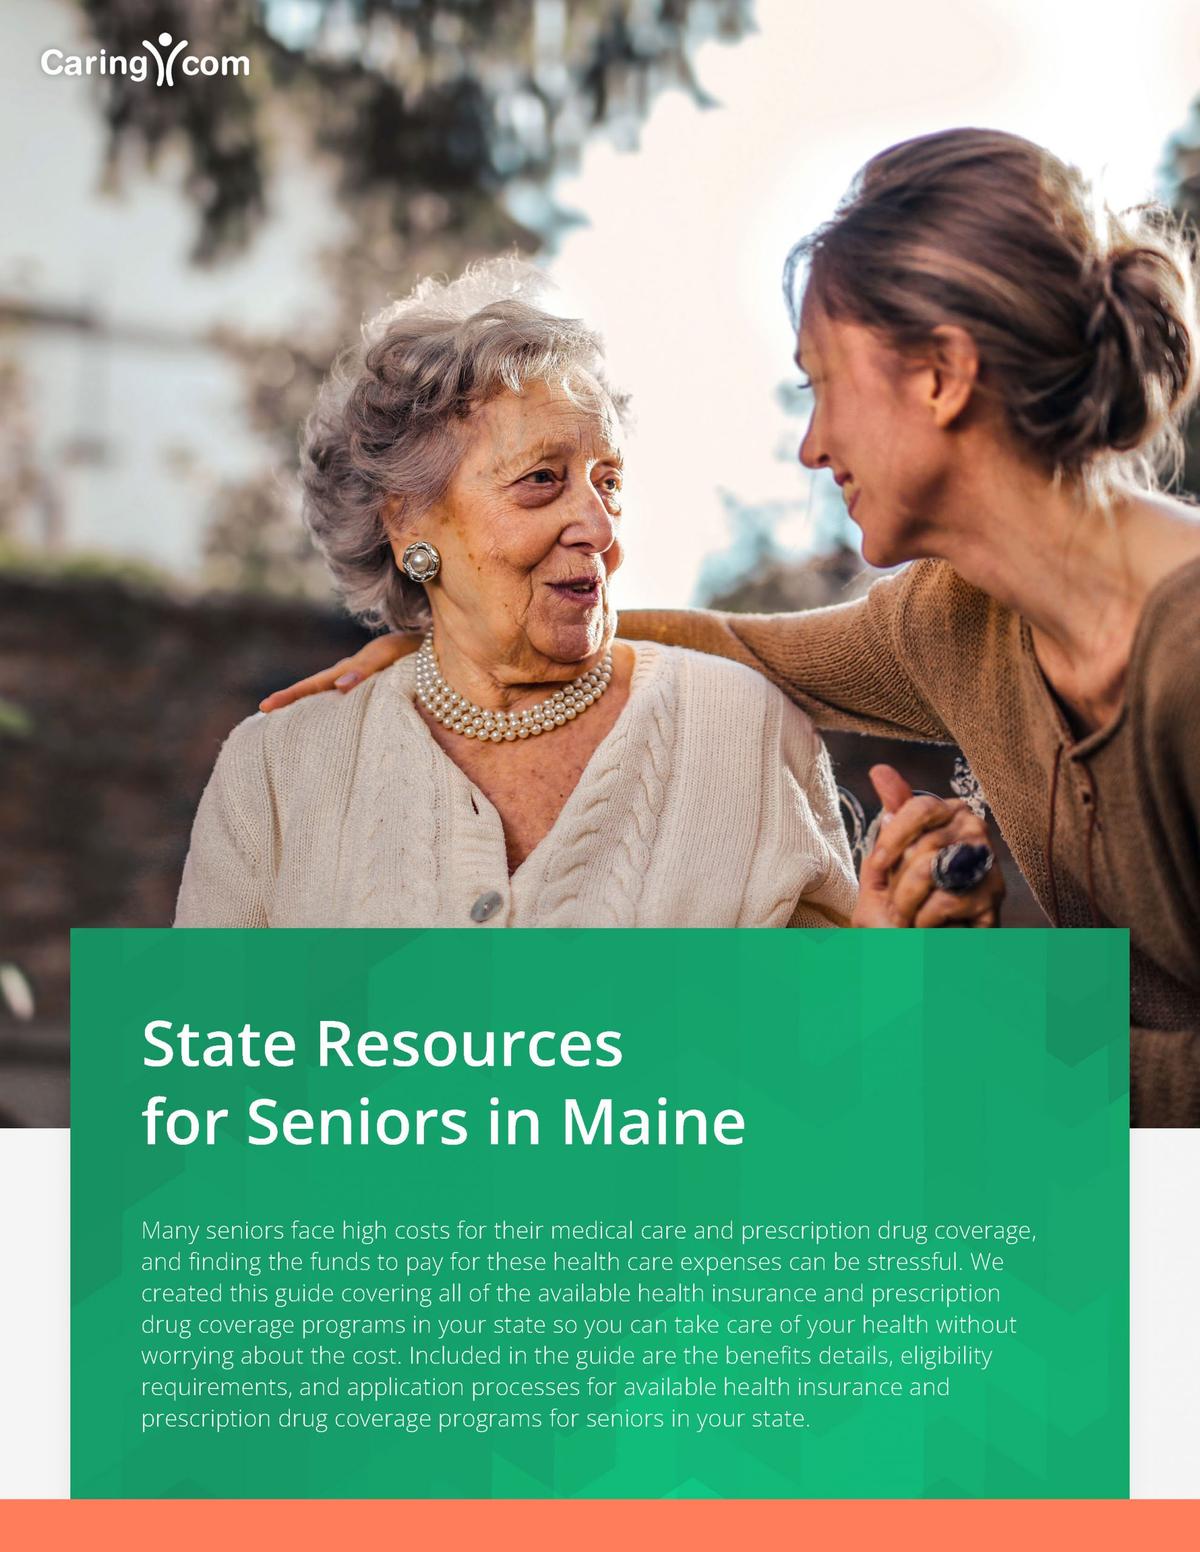 Financial Assistance for Prescriptions in Maine